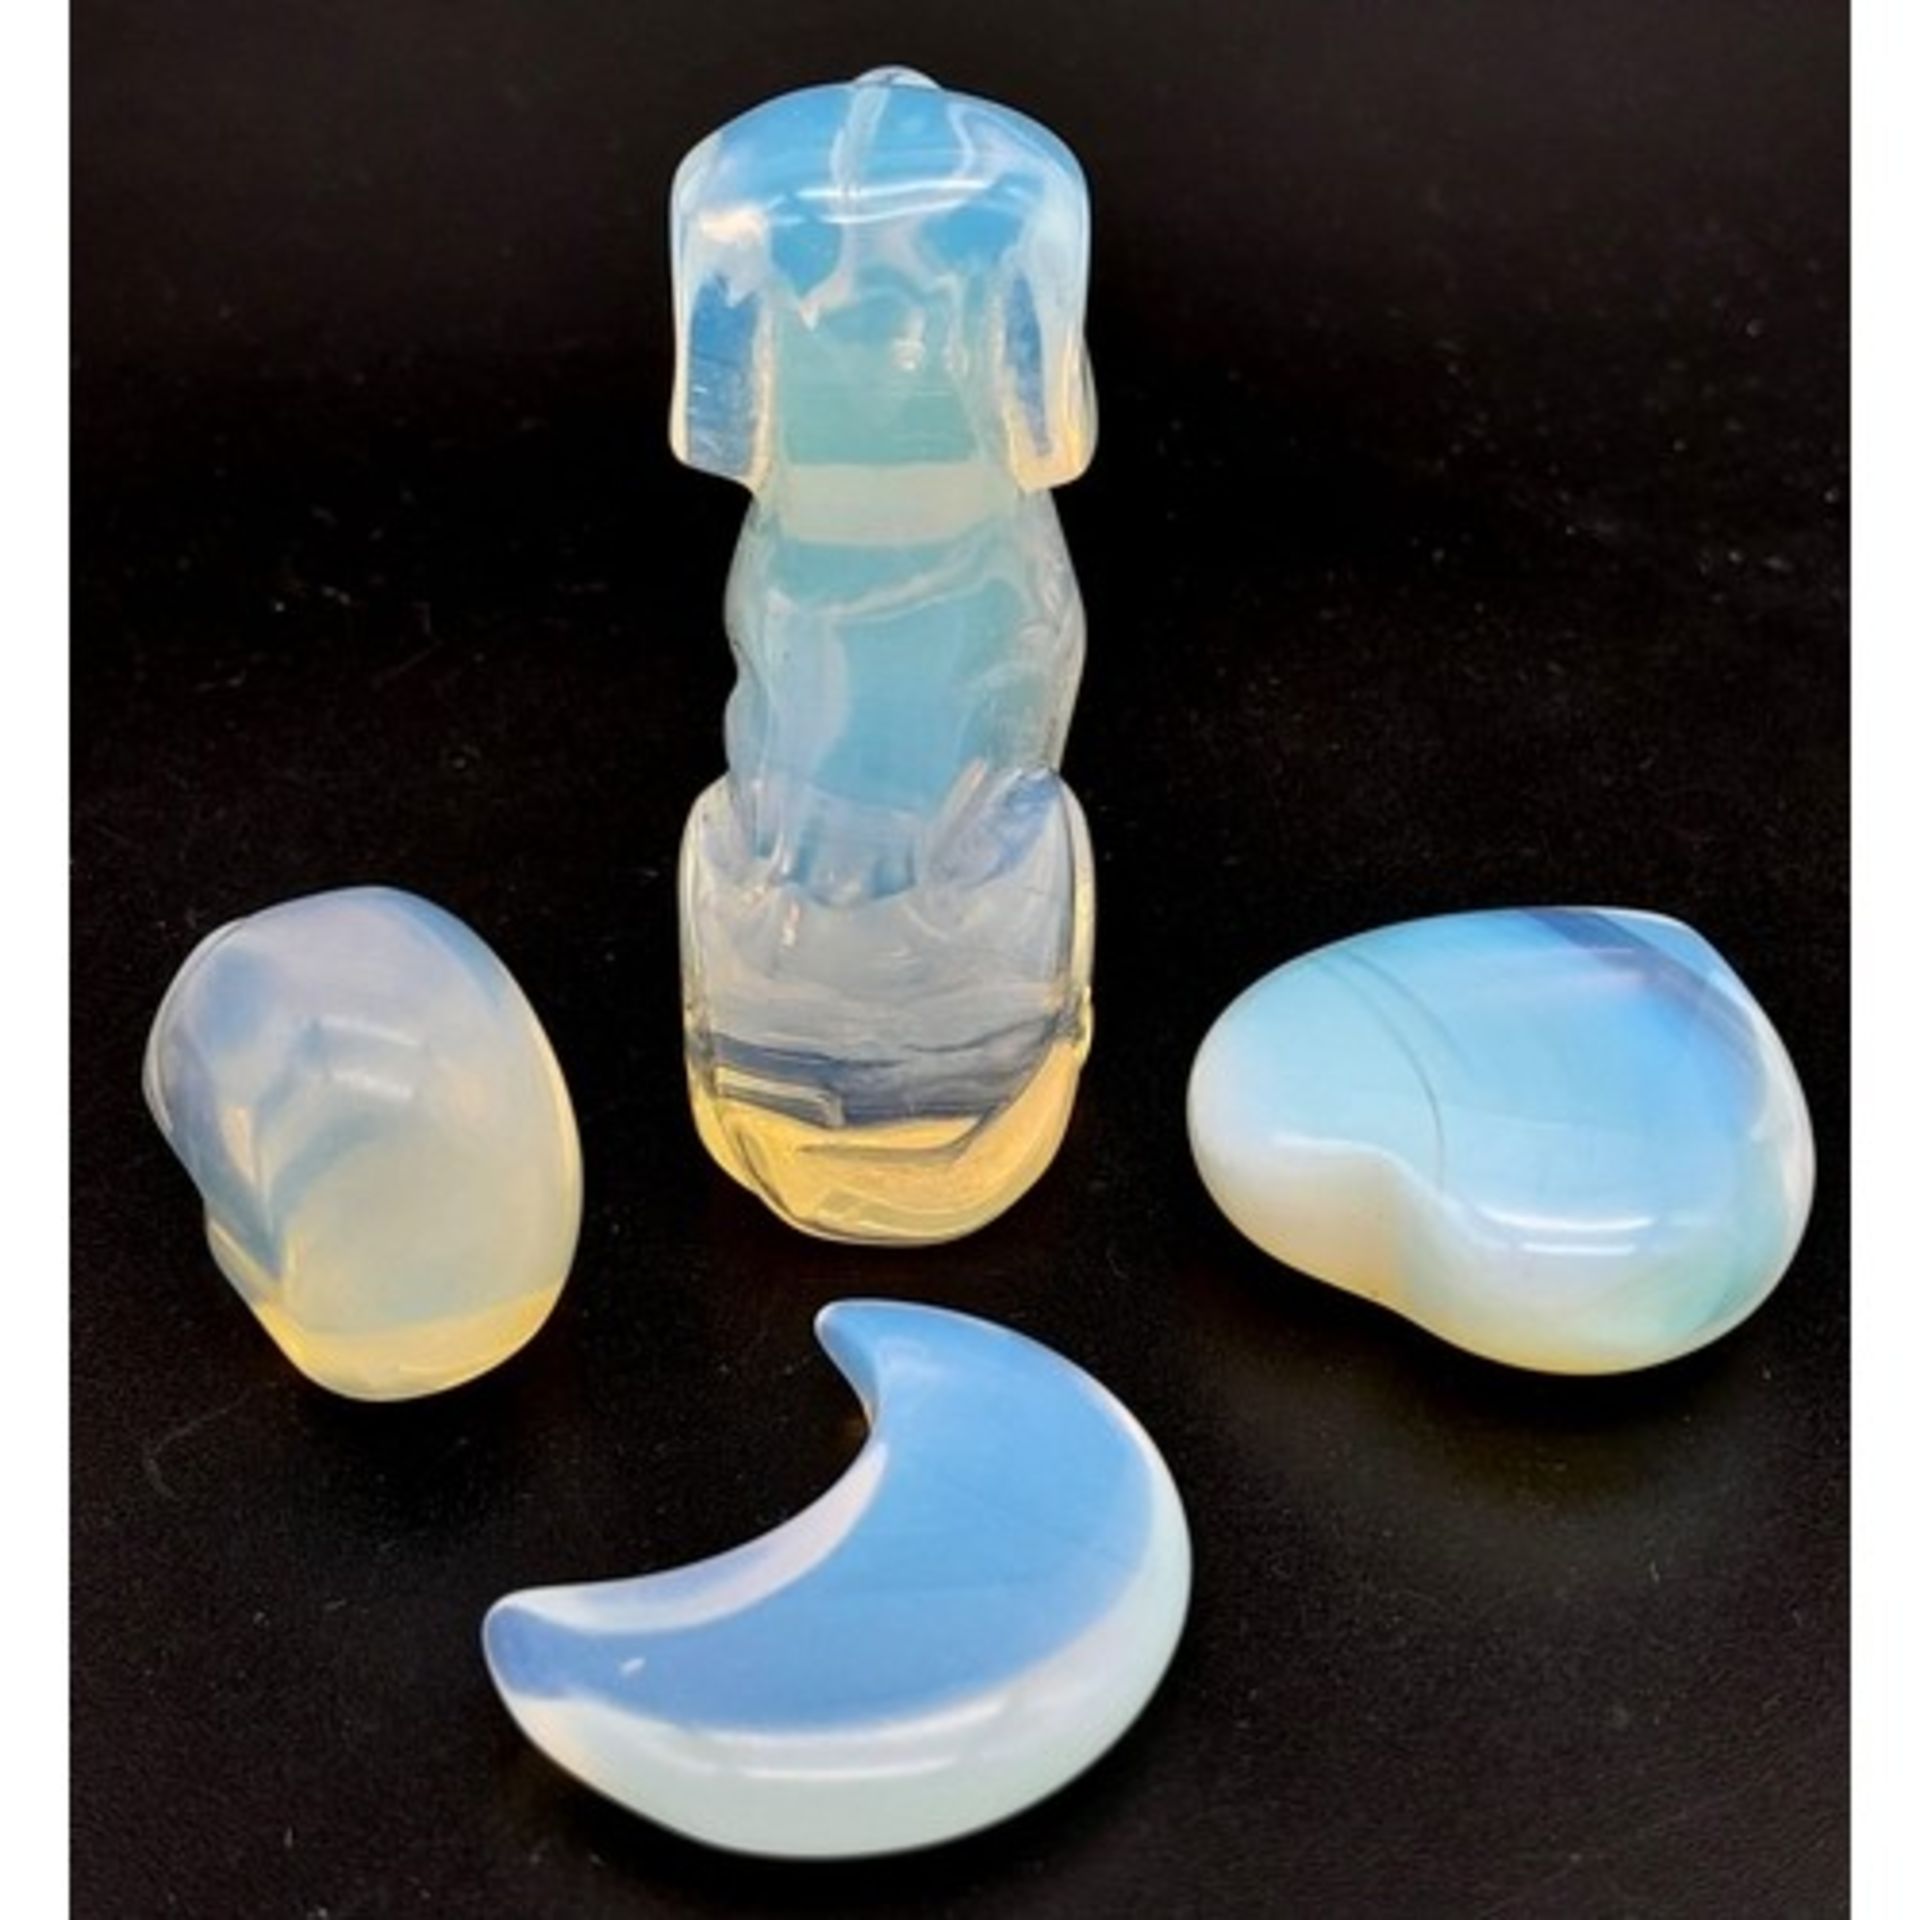 Parcel of 4 Opalite Figurines Featuring a Dog, Skull, Heart & Moon. - Image 2 of 4